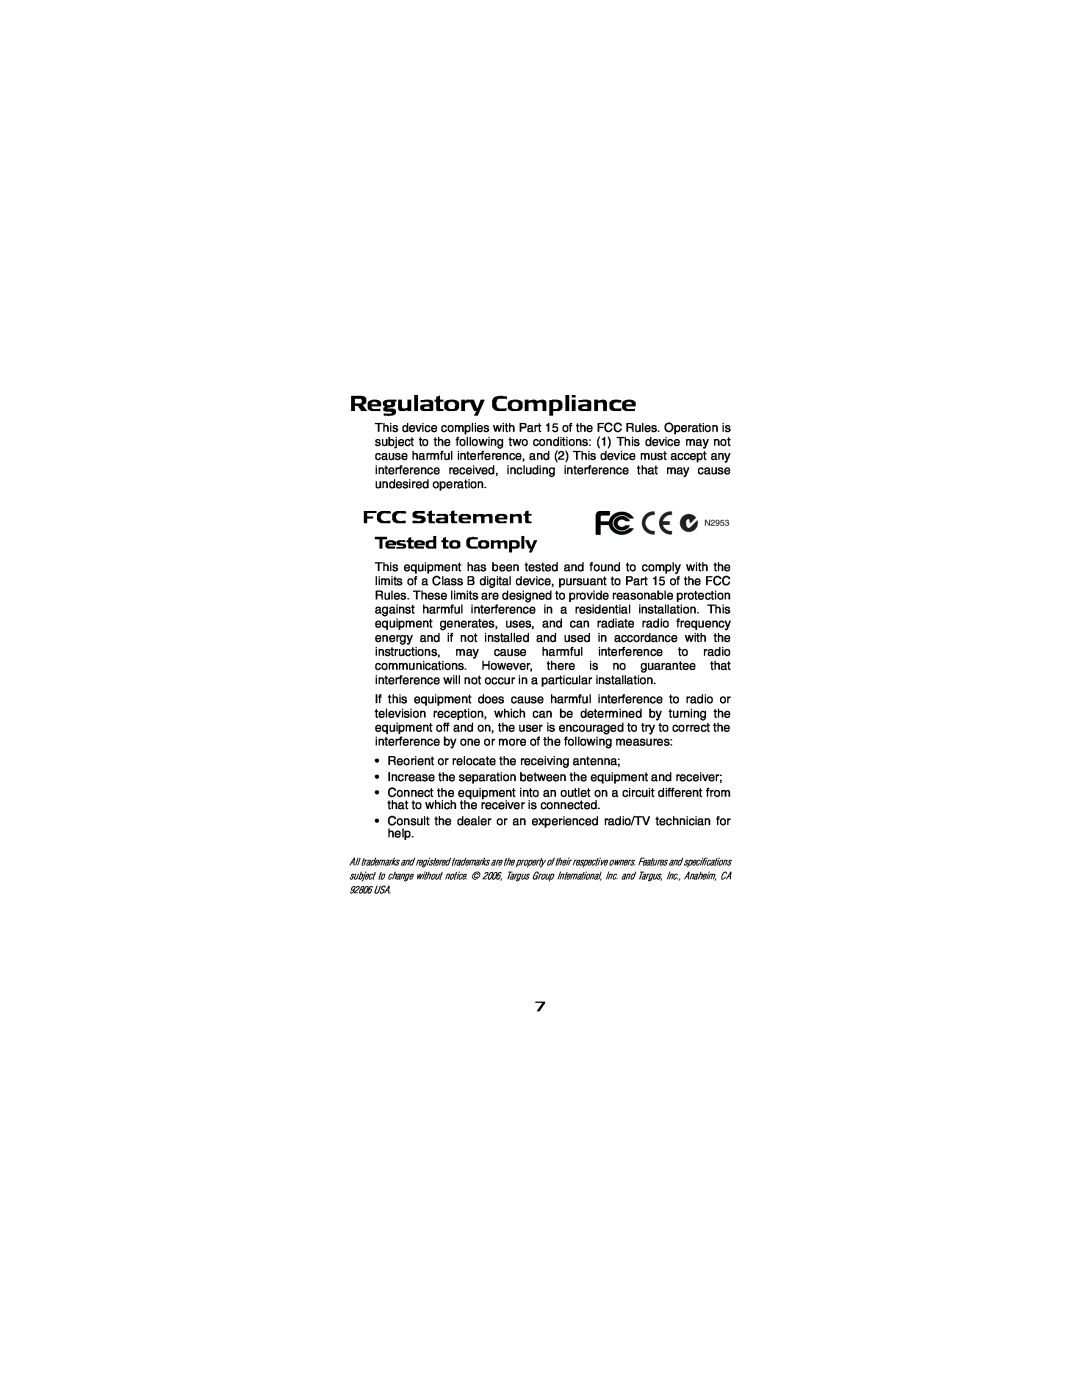 Targus AMU18US-10 specifications Regulatory Compliance, Tested to Comply, FCC Statement 